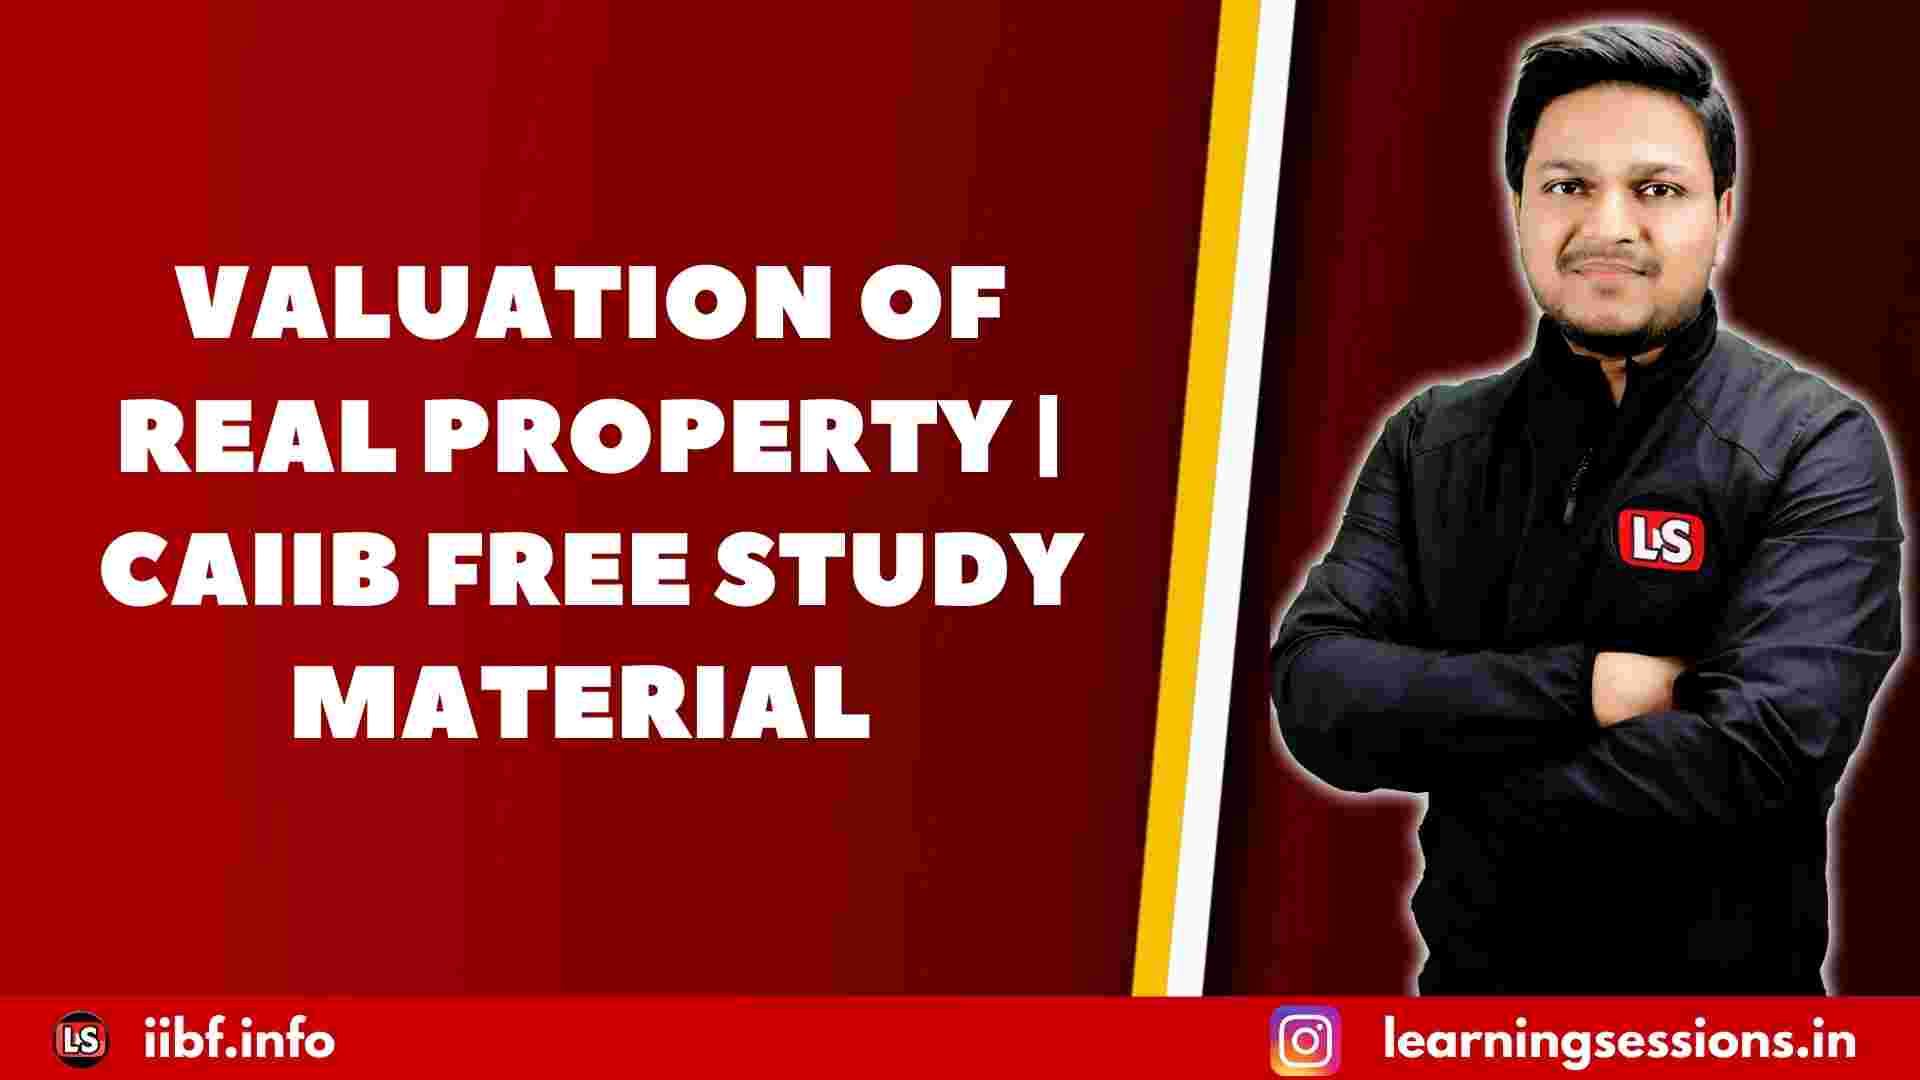 VALUATION OF REAL PROPERTY | CAIIB FREE STUDY MATERIAL